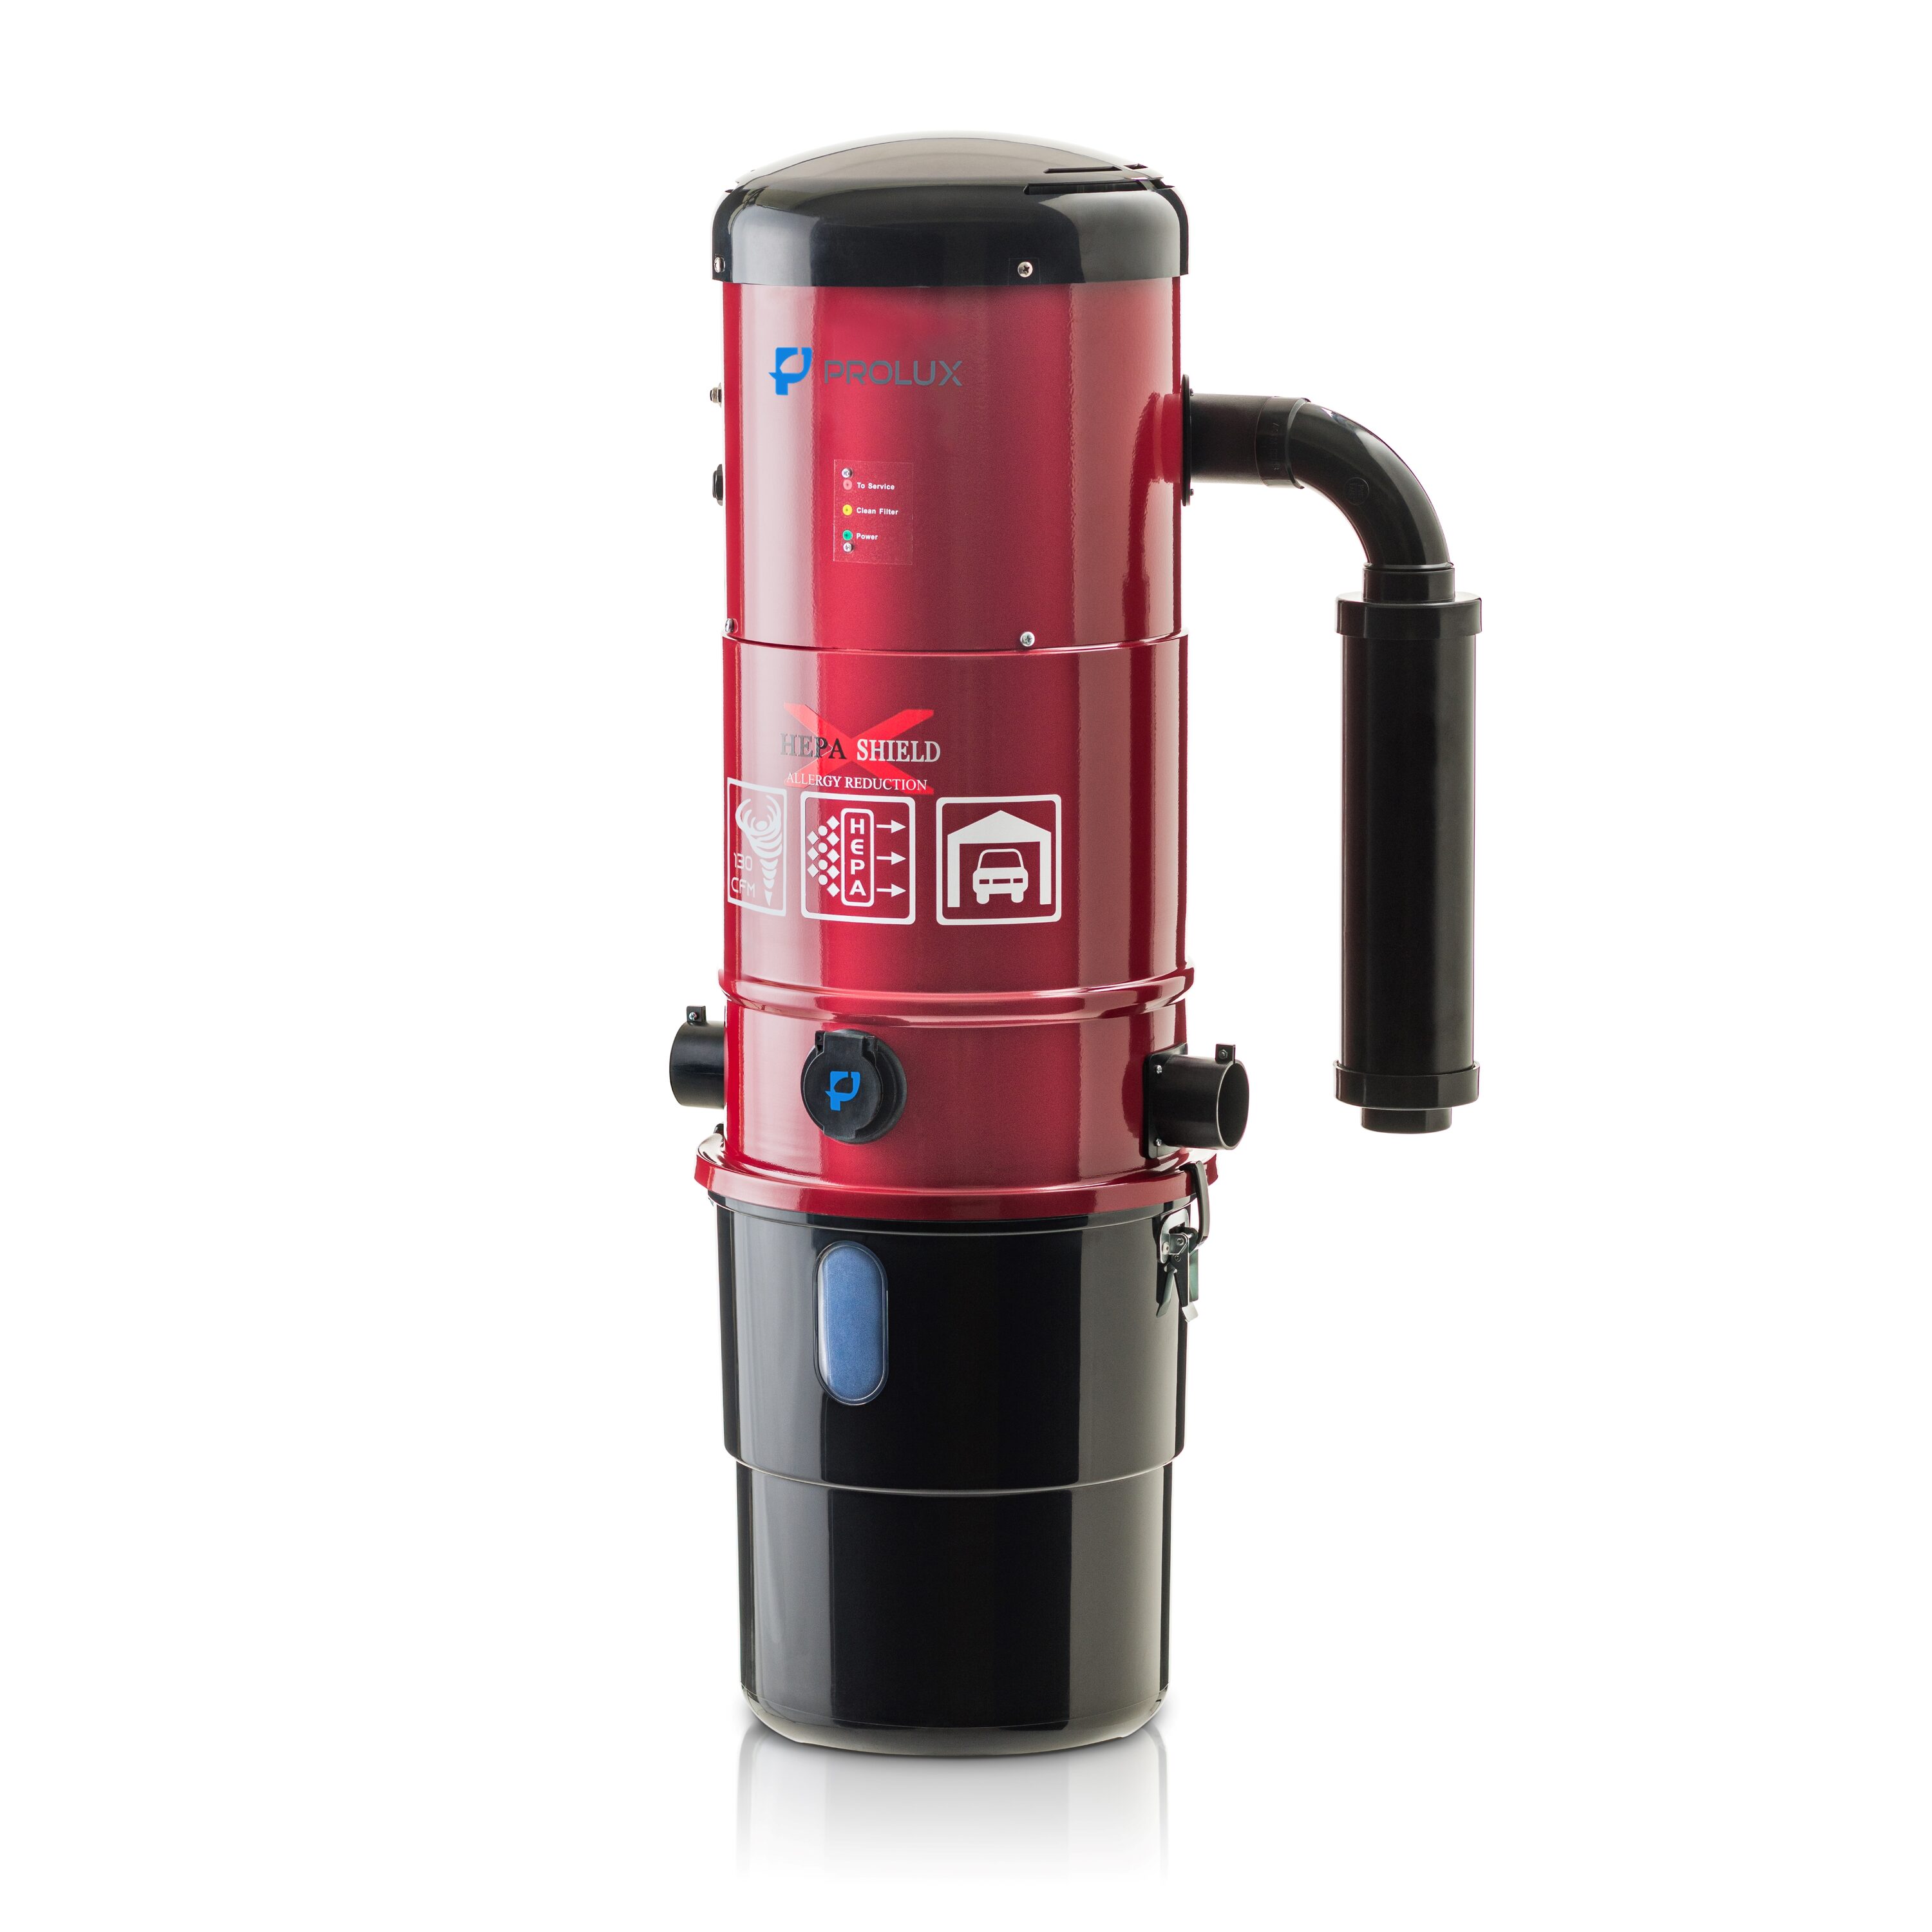 Garage Vac PRO – Manufacturer of VacuMaid Central Vacuum Systems